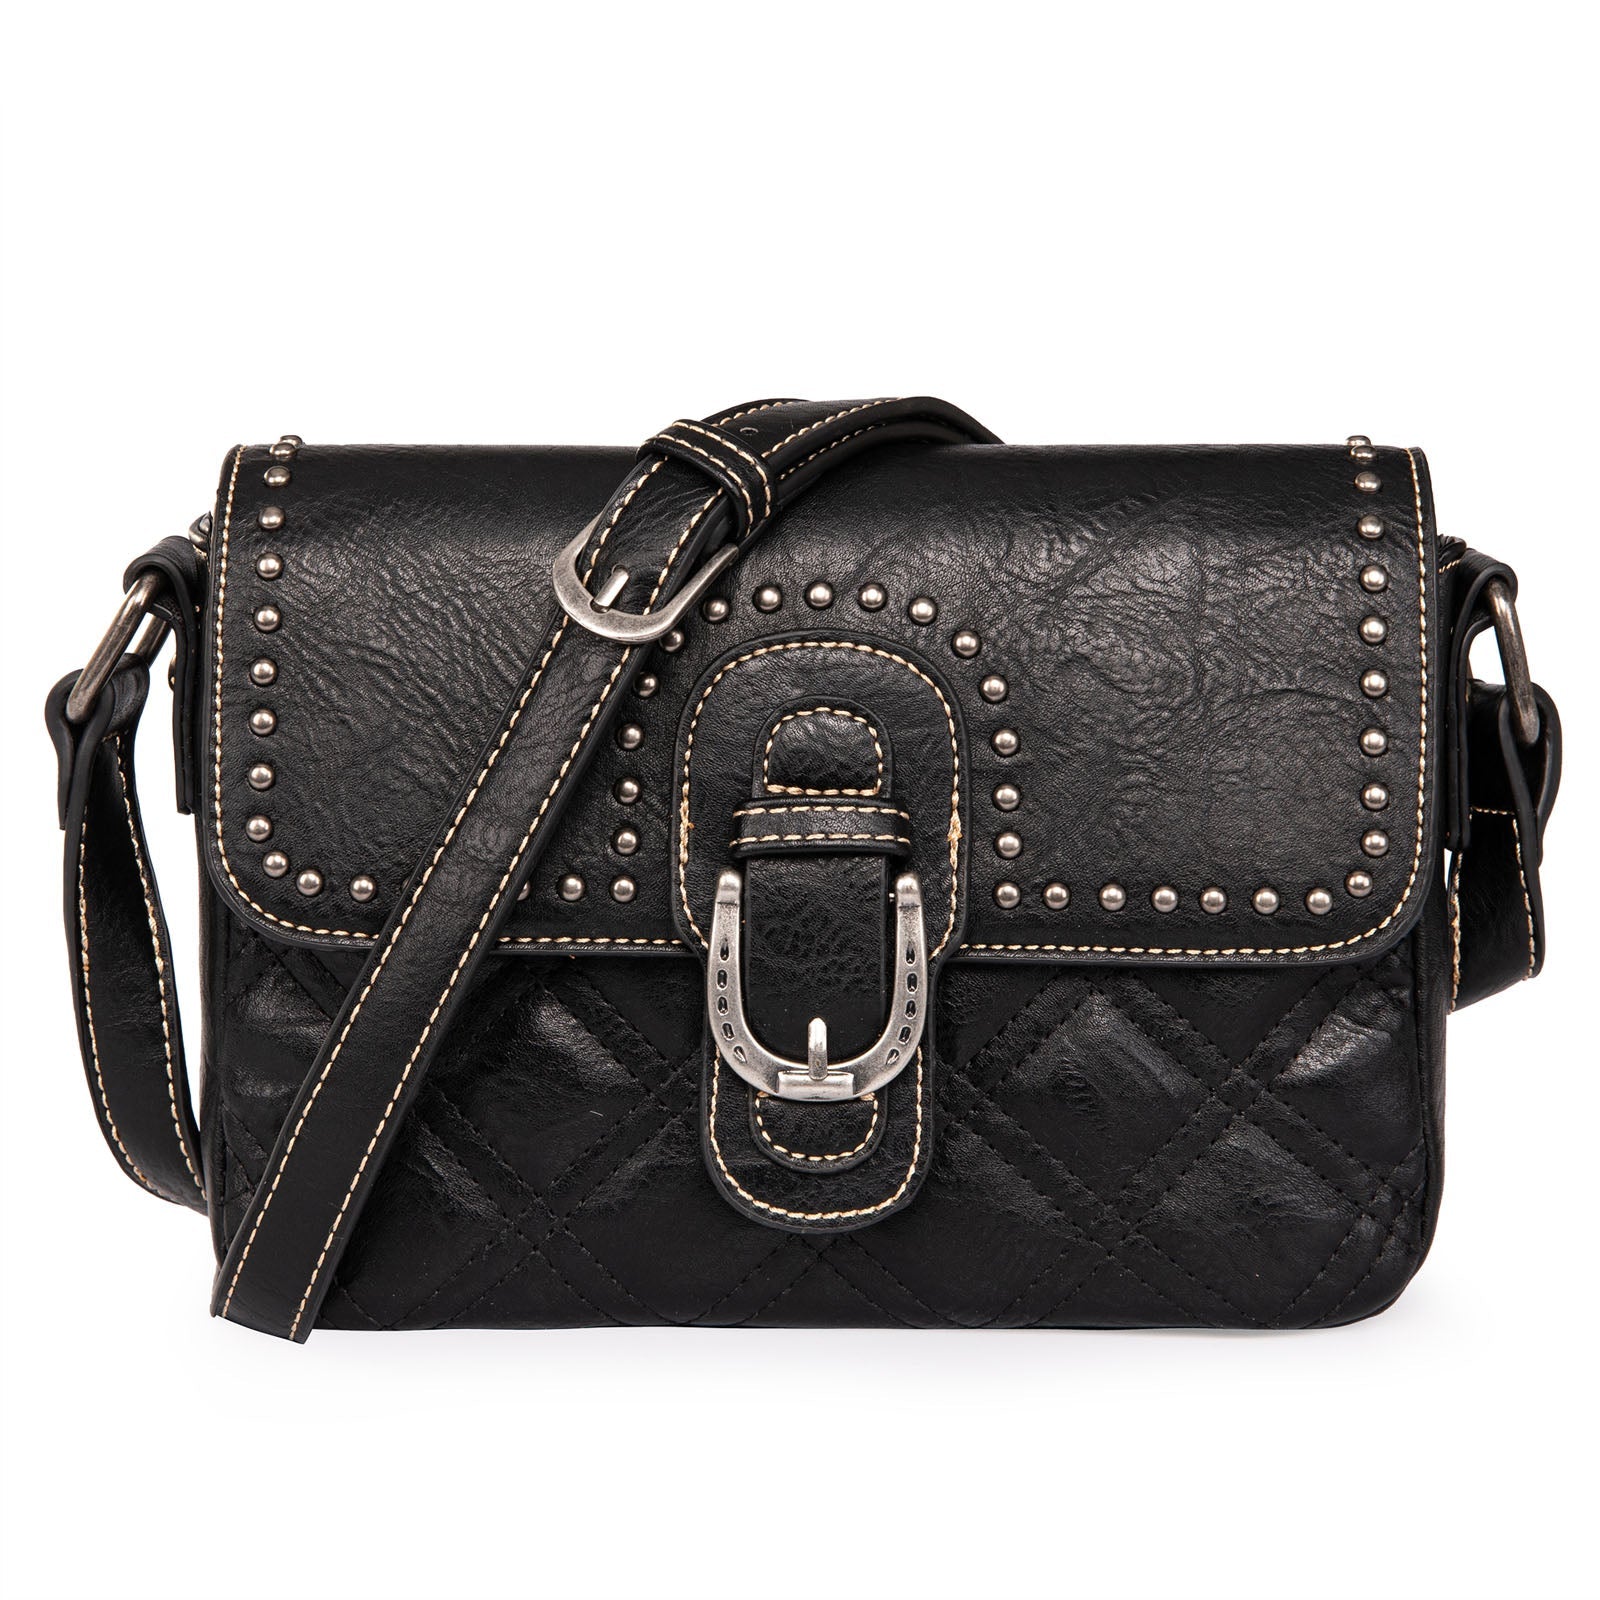 Wrangler Buckle Collection Crossbody (Wrangler by Montana West) - Cowgirl Wear